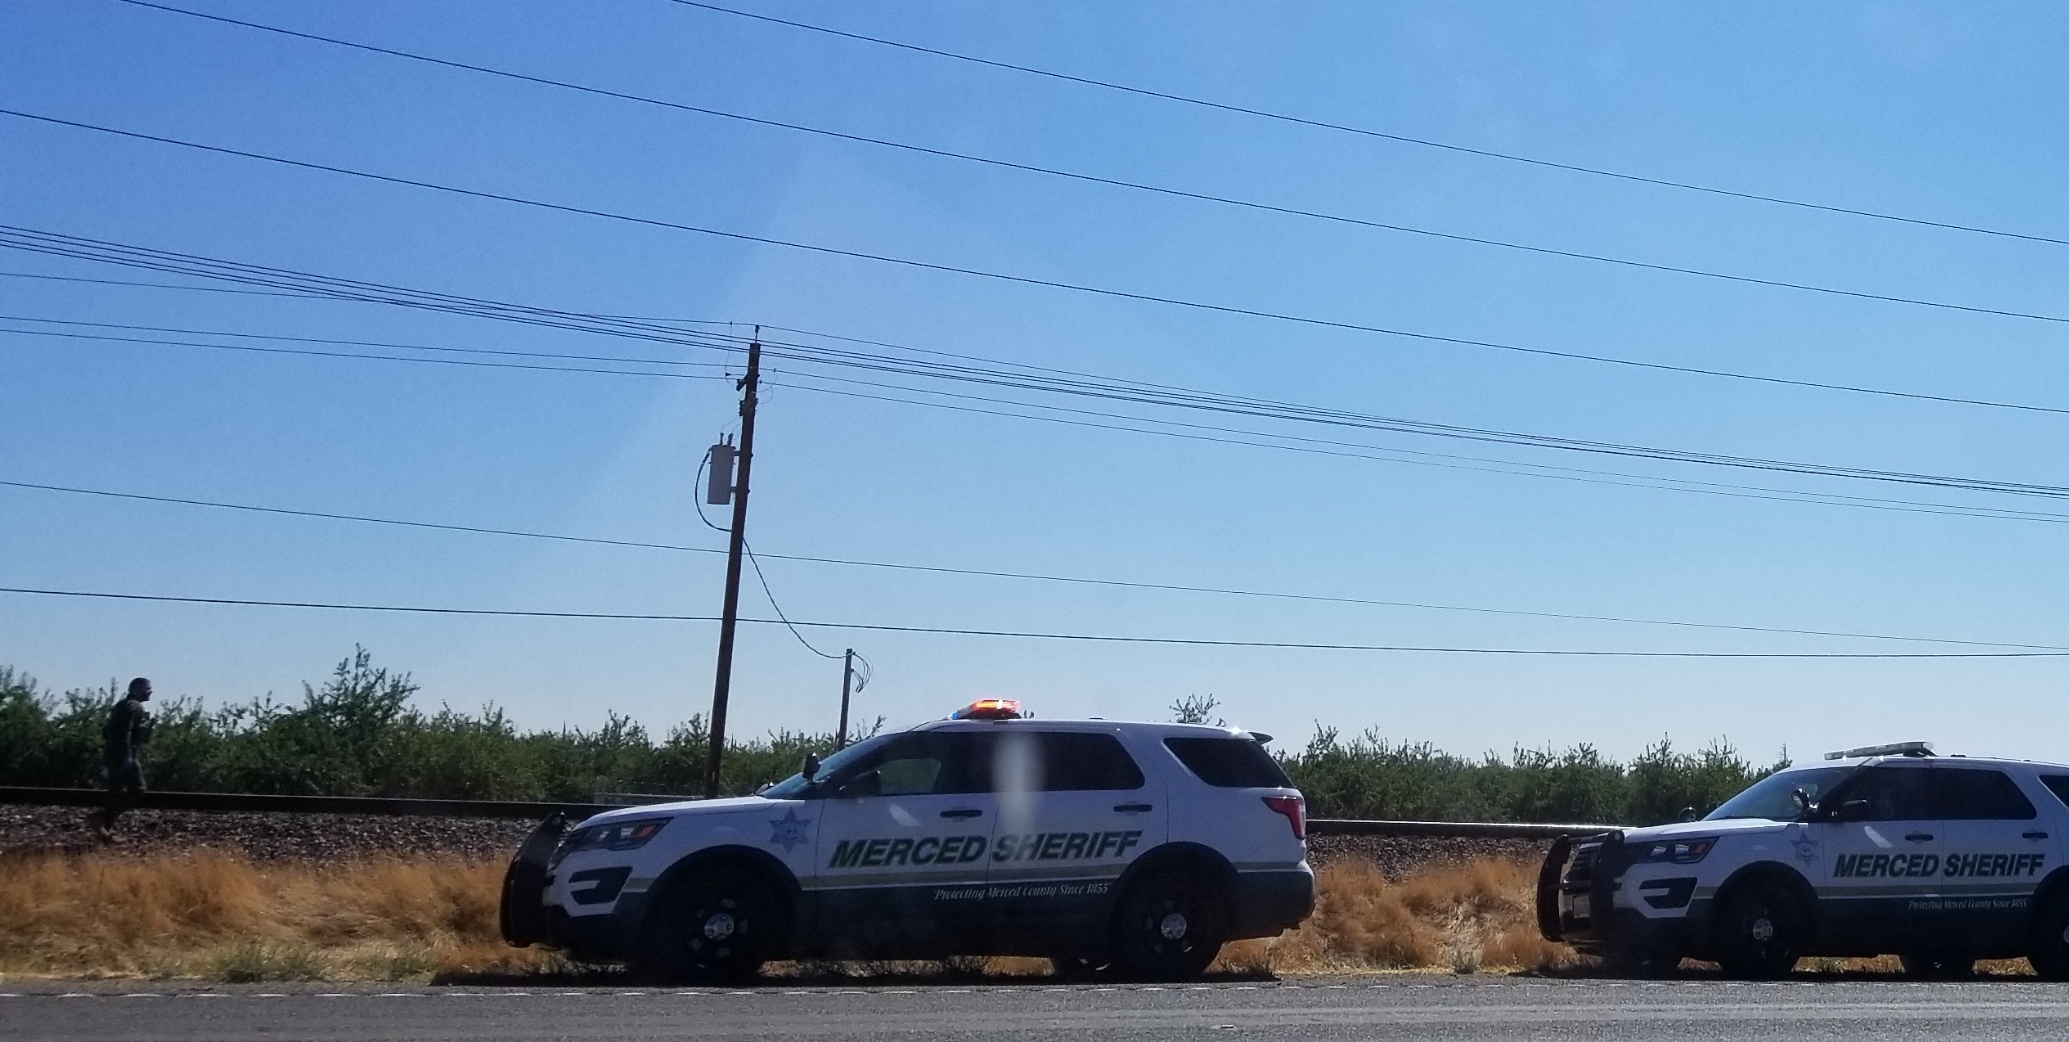 A person was killed after being struck by Amtrak train in Merced